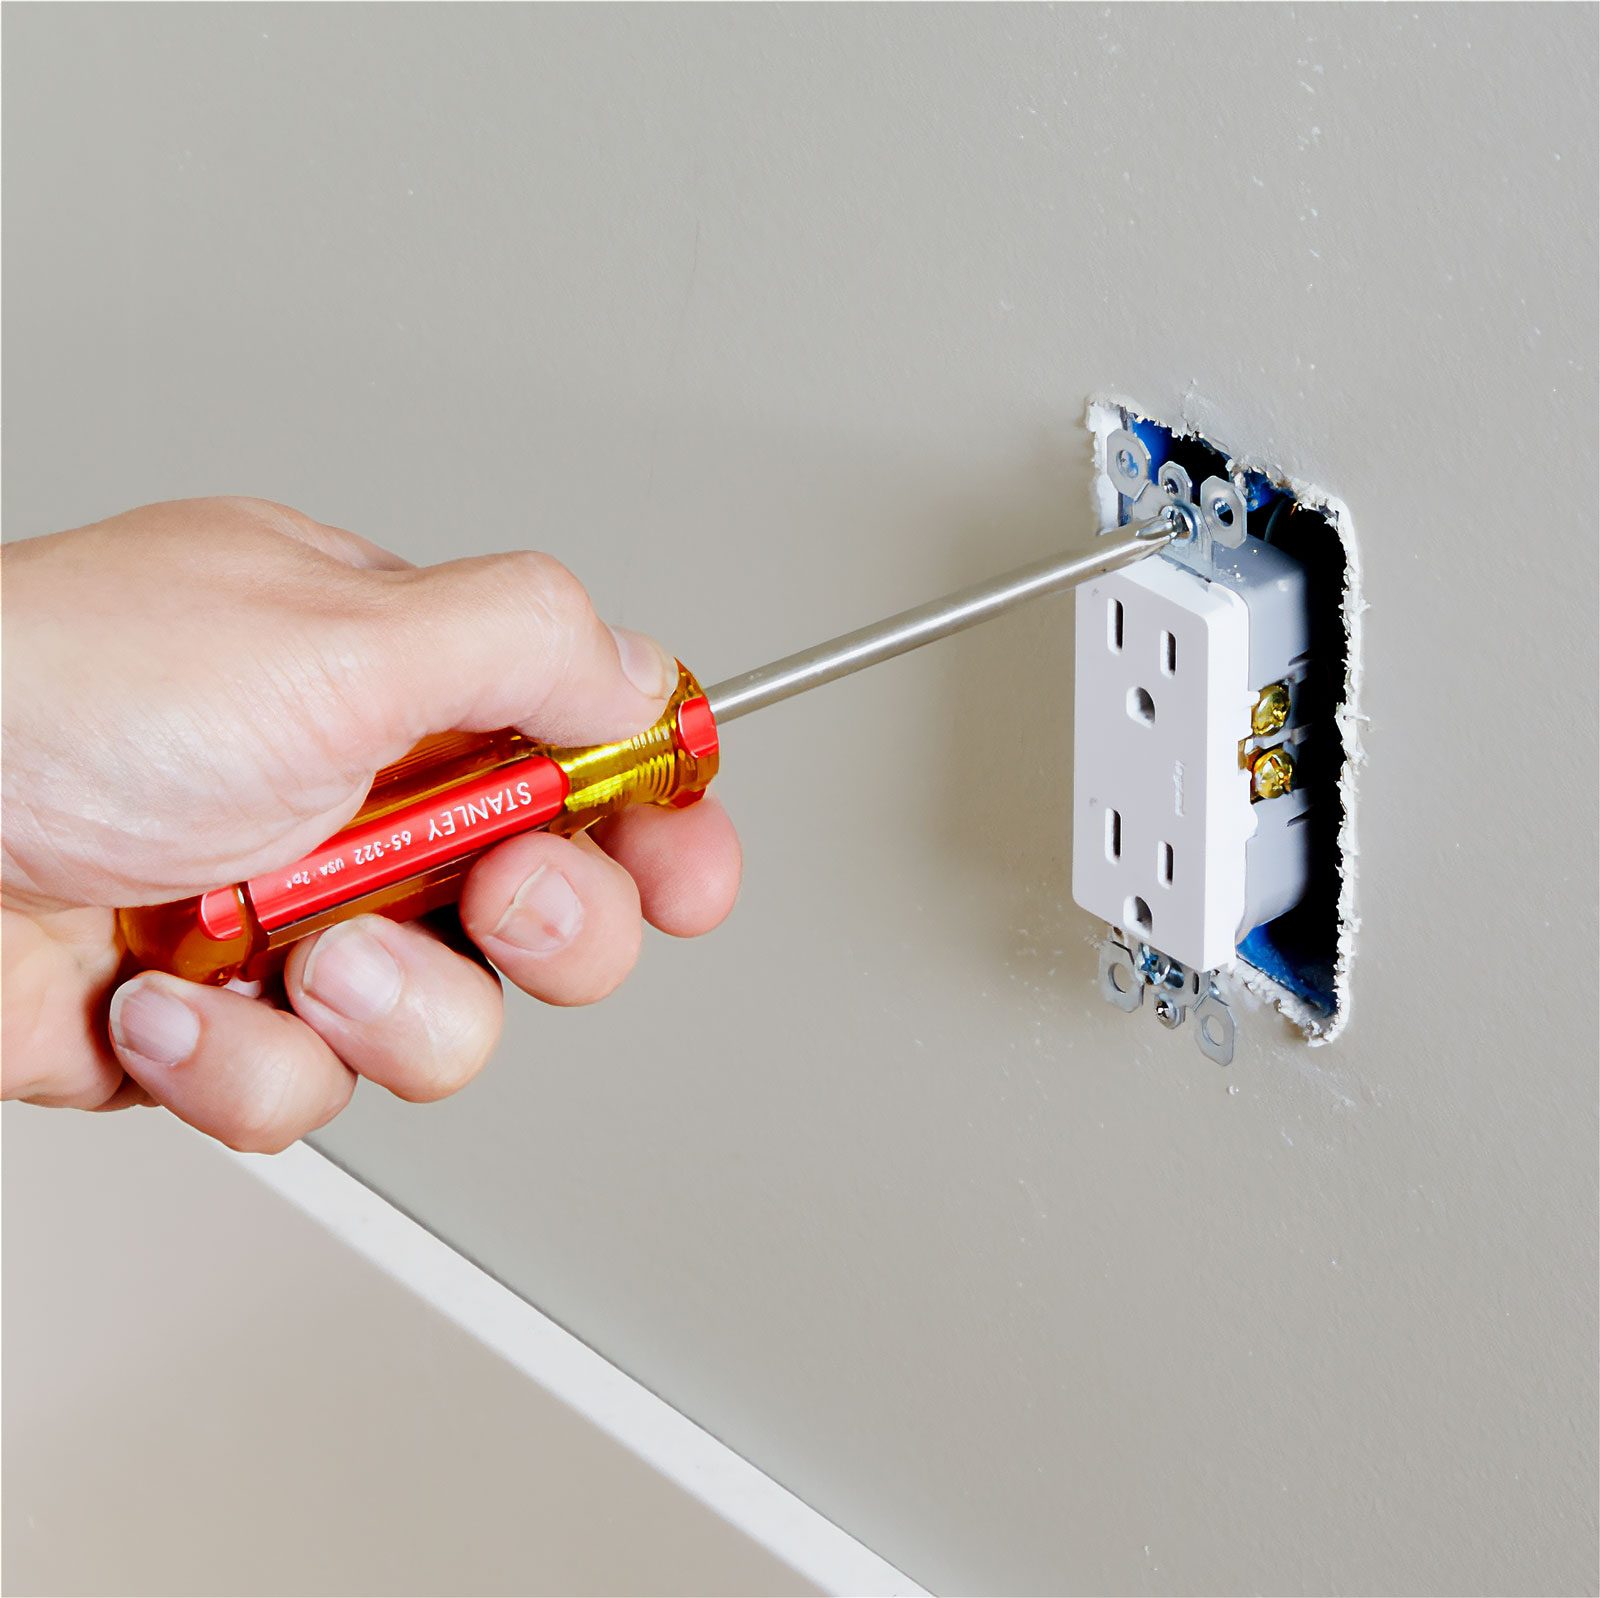 working on installing an outlet on a wall